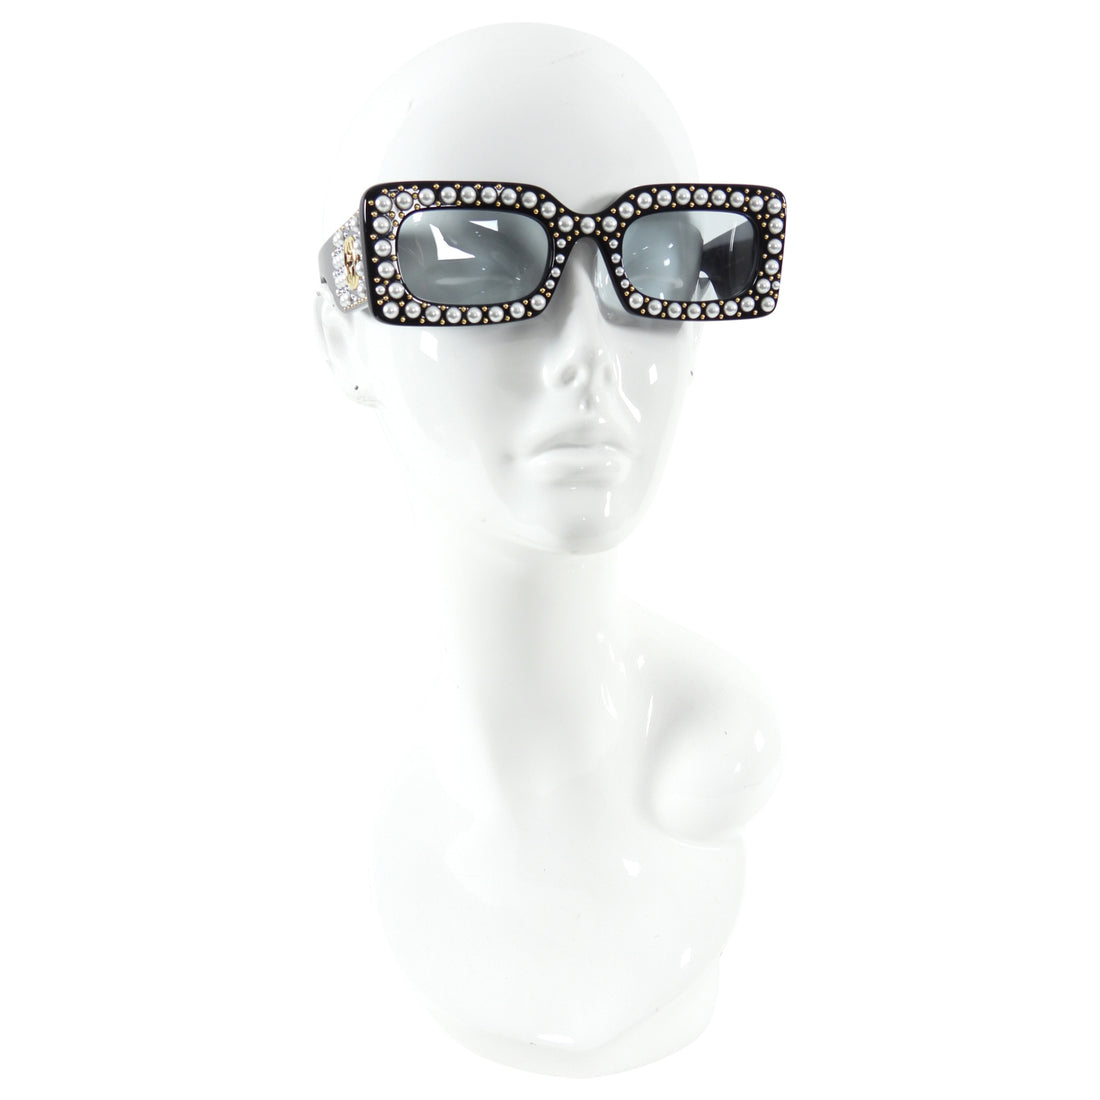 Gucci Black Rectangular Sunglasses with Pearl Stud Detail GG0146S